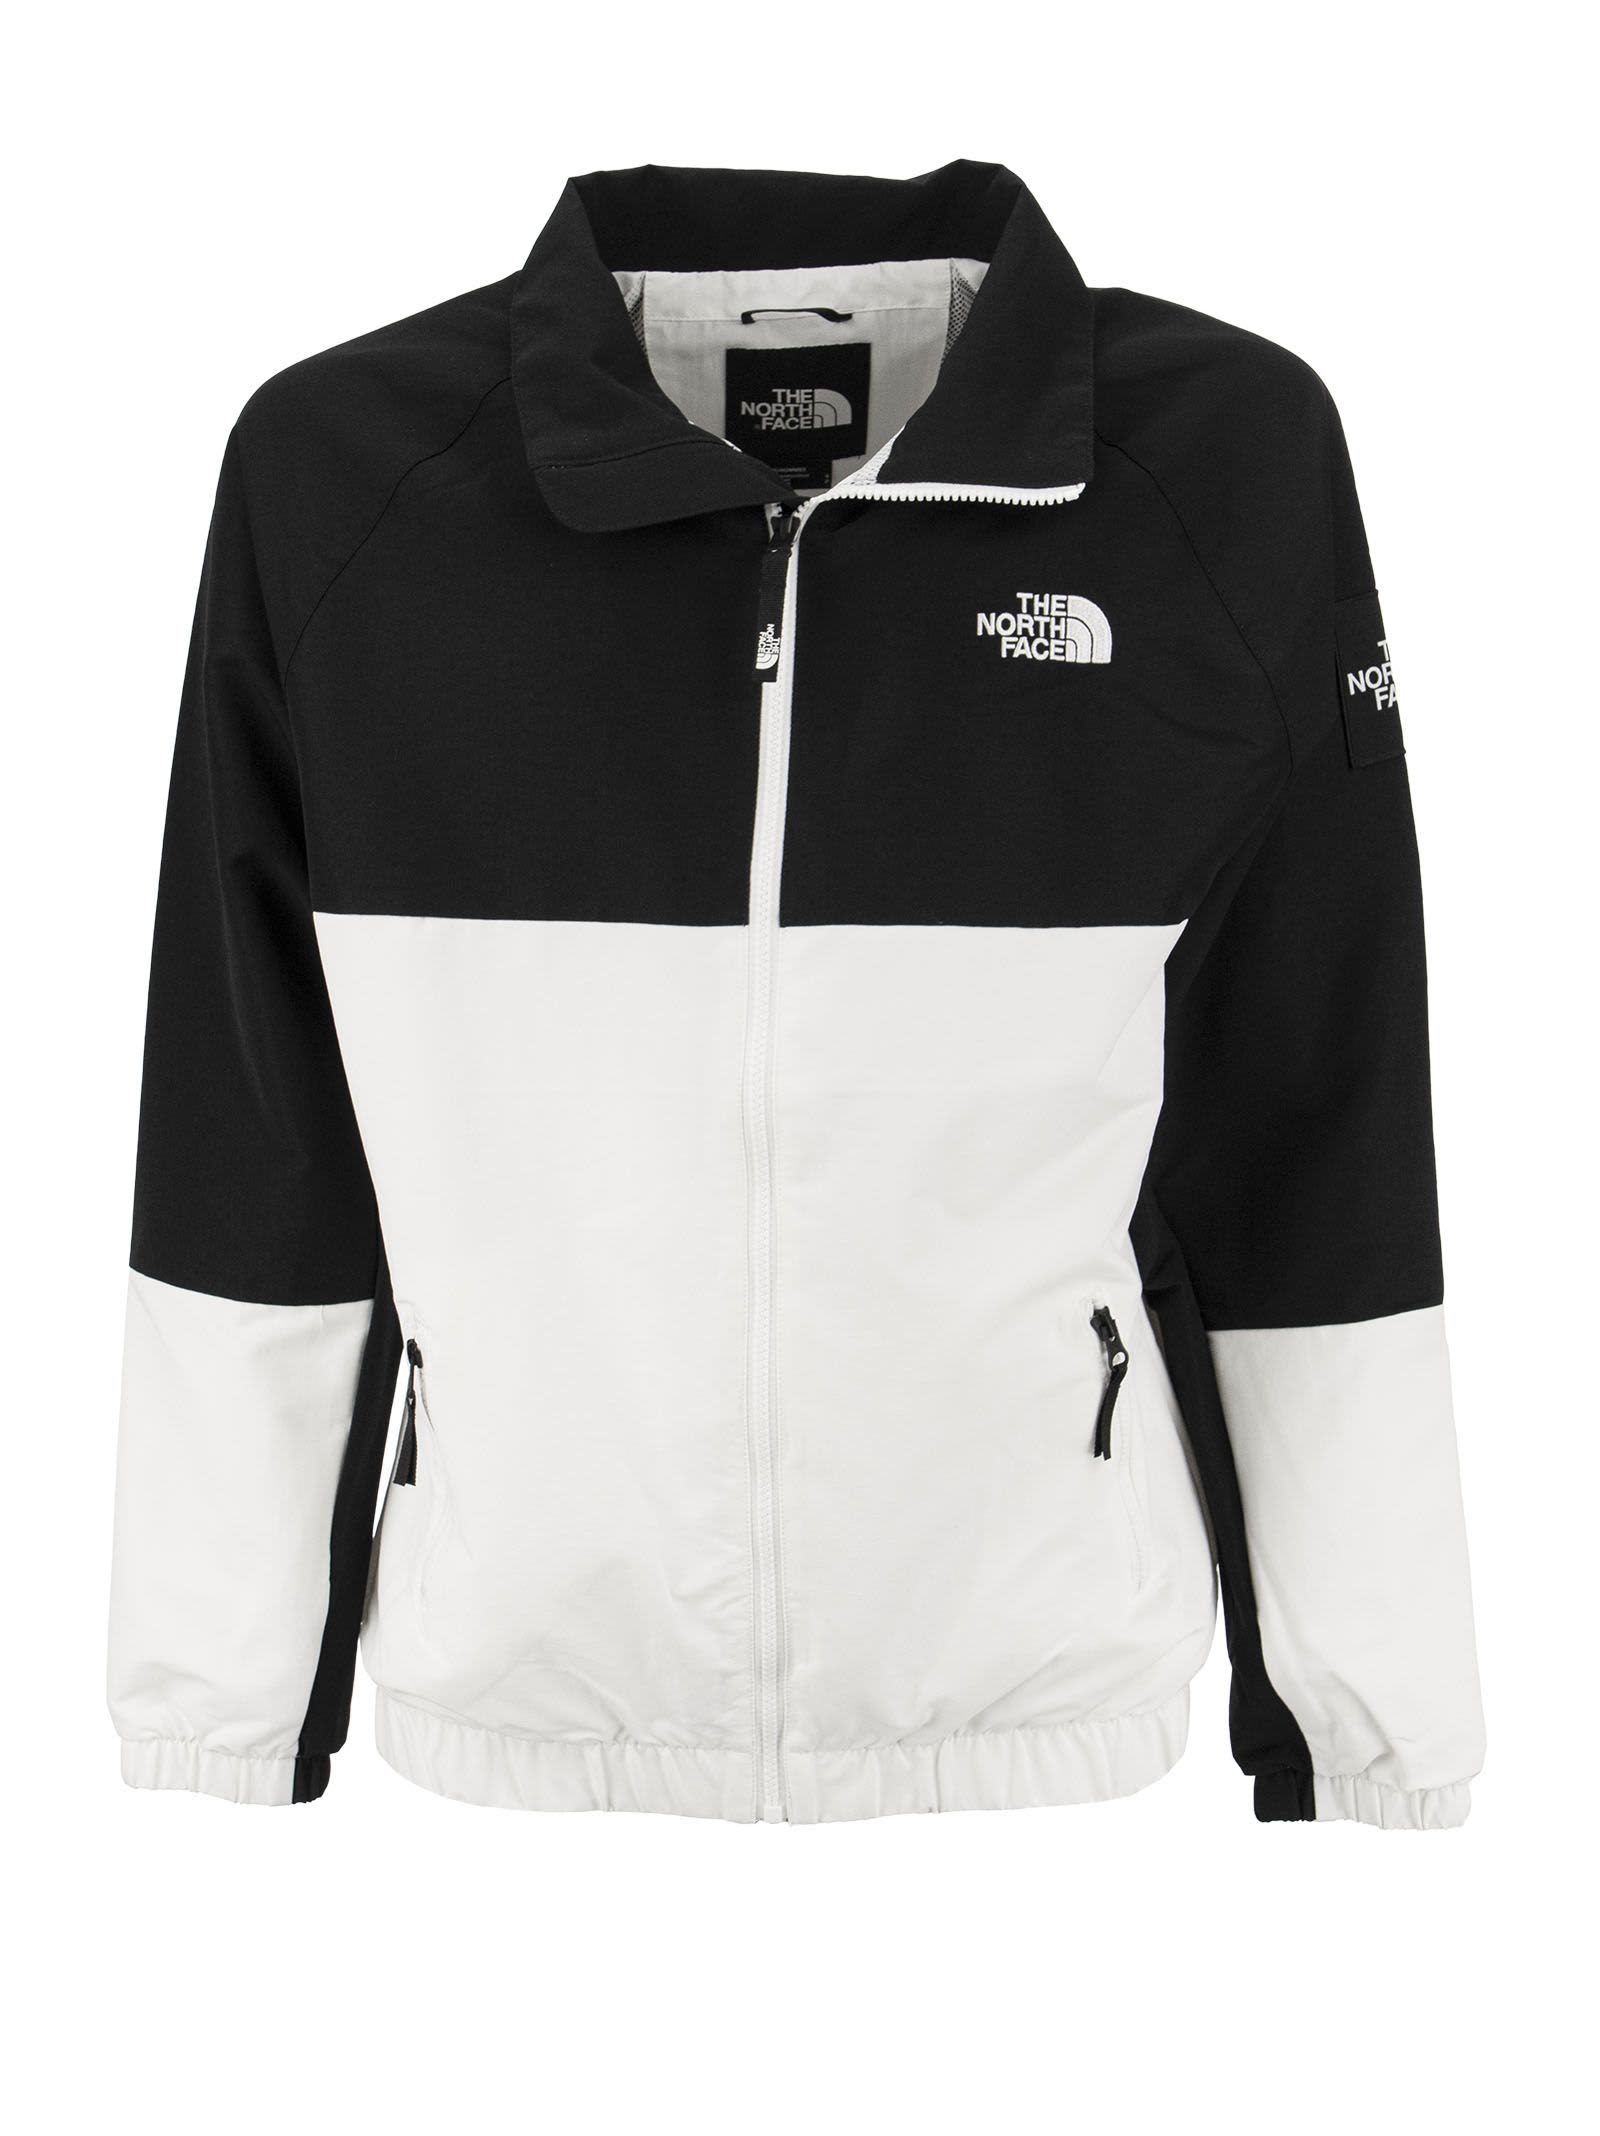 The North Face Light Two-tone Jacket